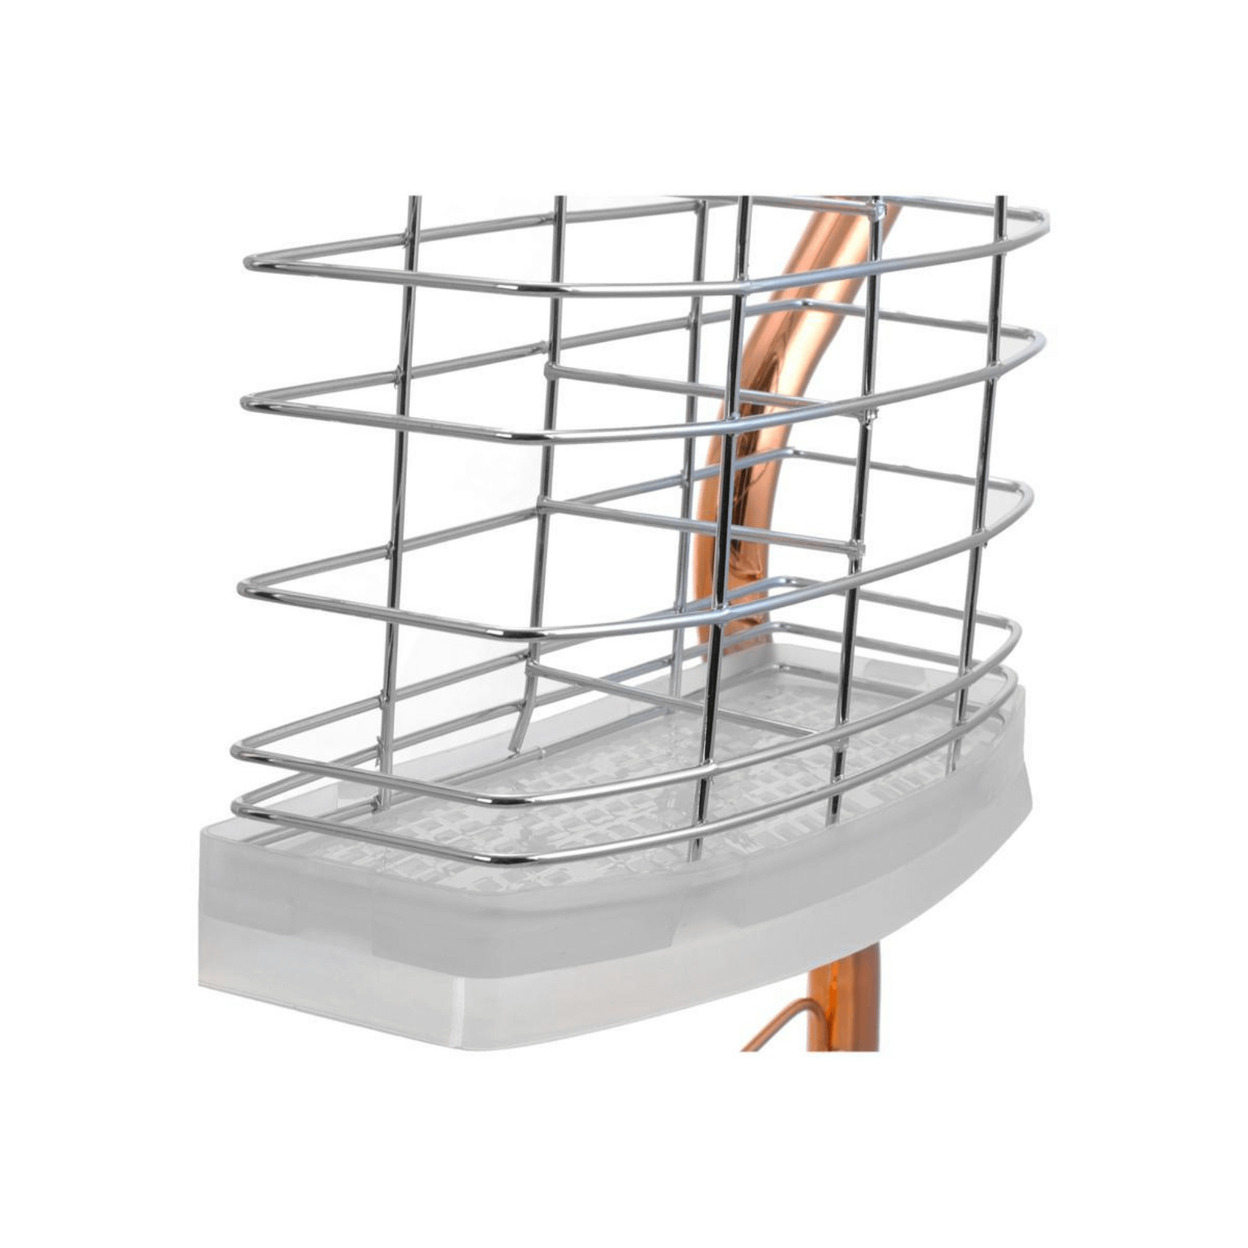 Better Chef 22" 2-Level Chrome-Plated R-Shaped Dish Rack